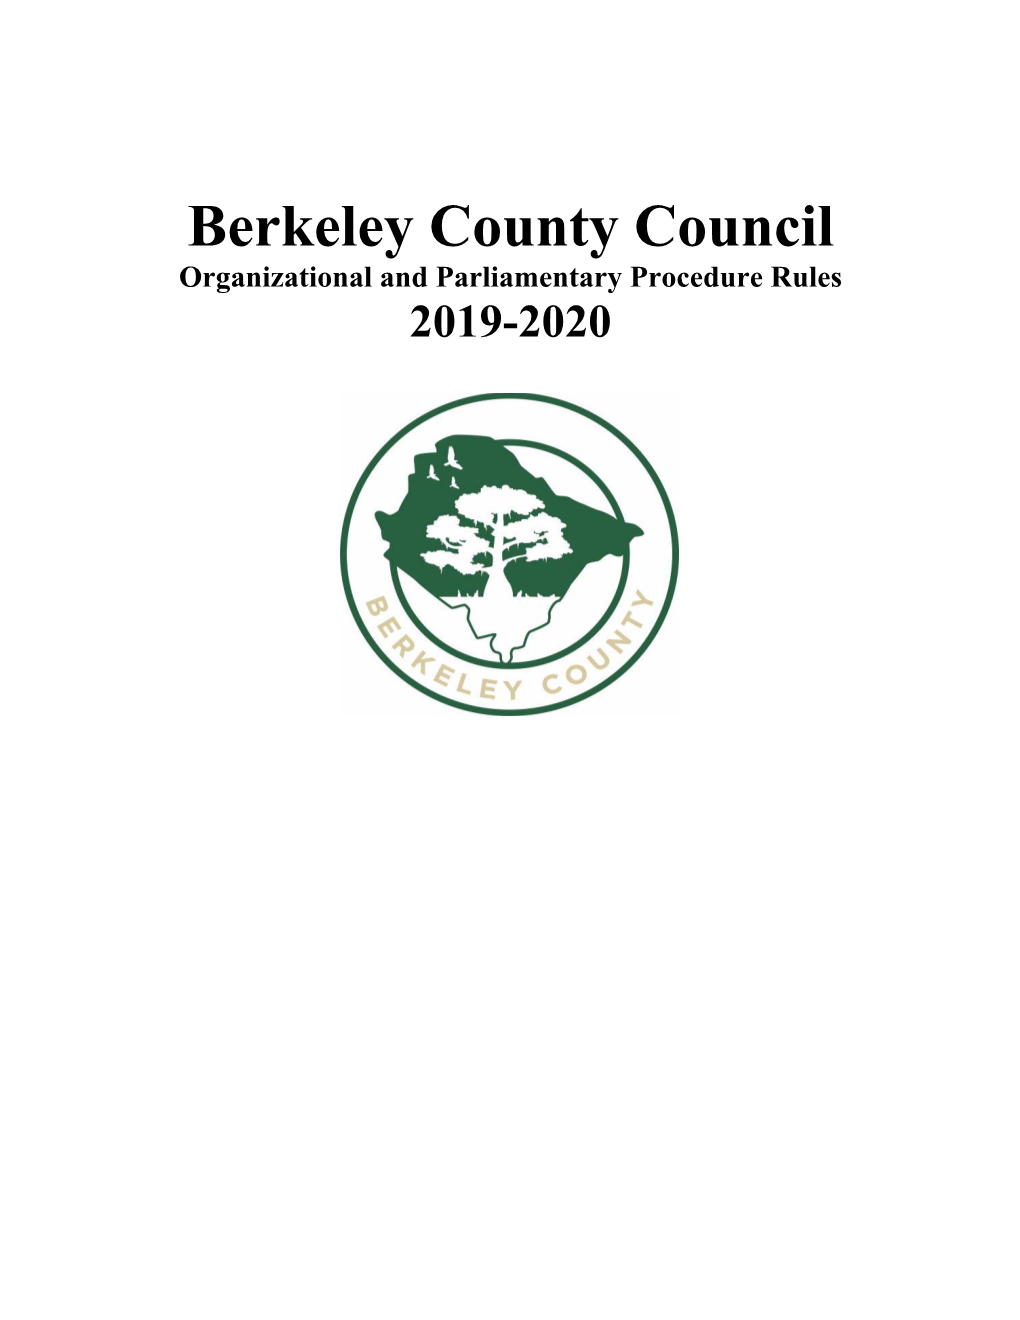 Berkeley County Council Organizational and Parliamentary Procedure Rules 2019-2020